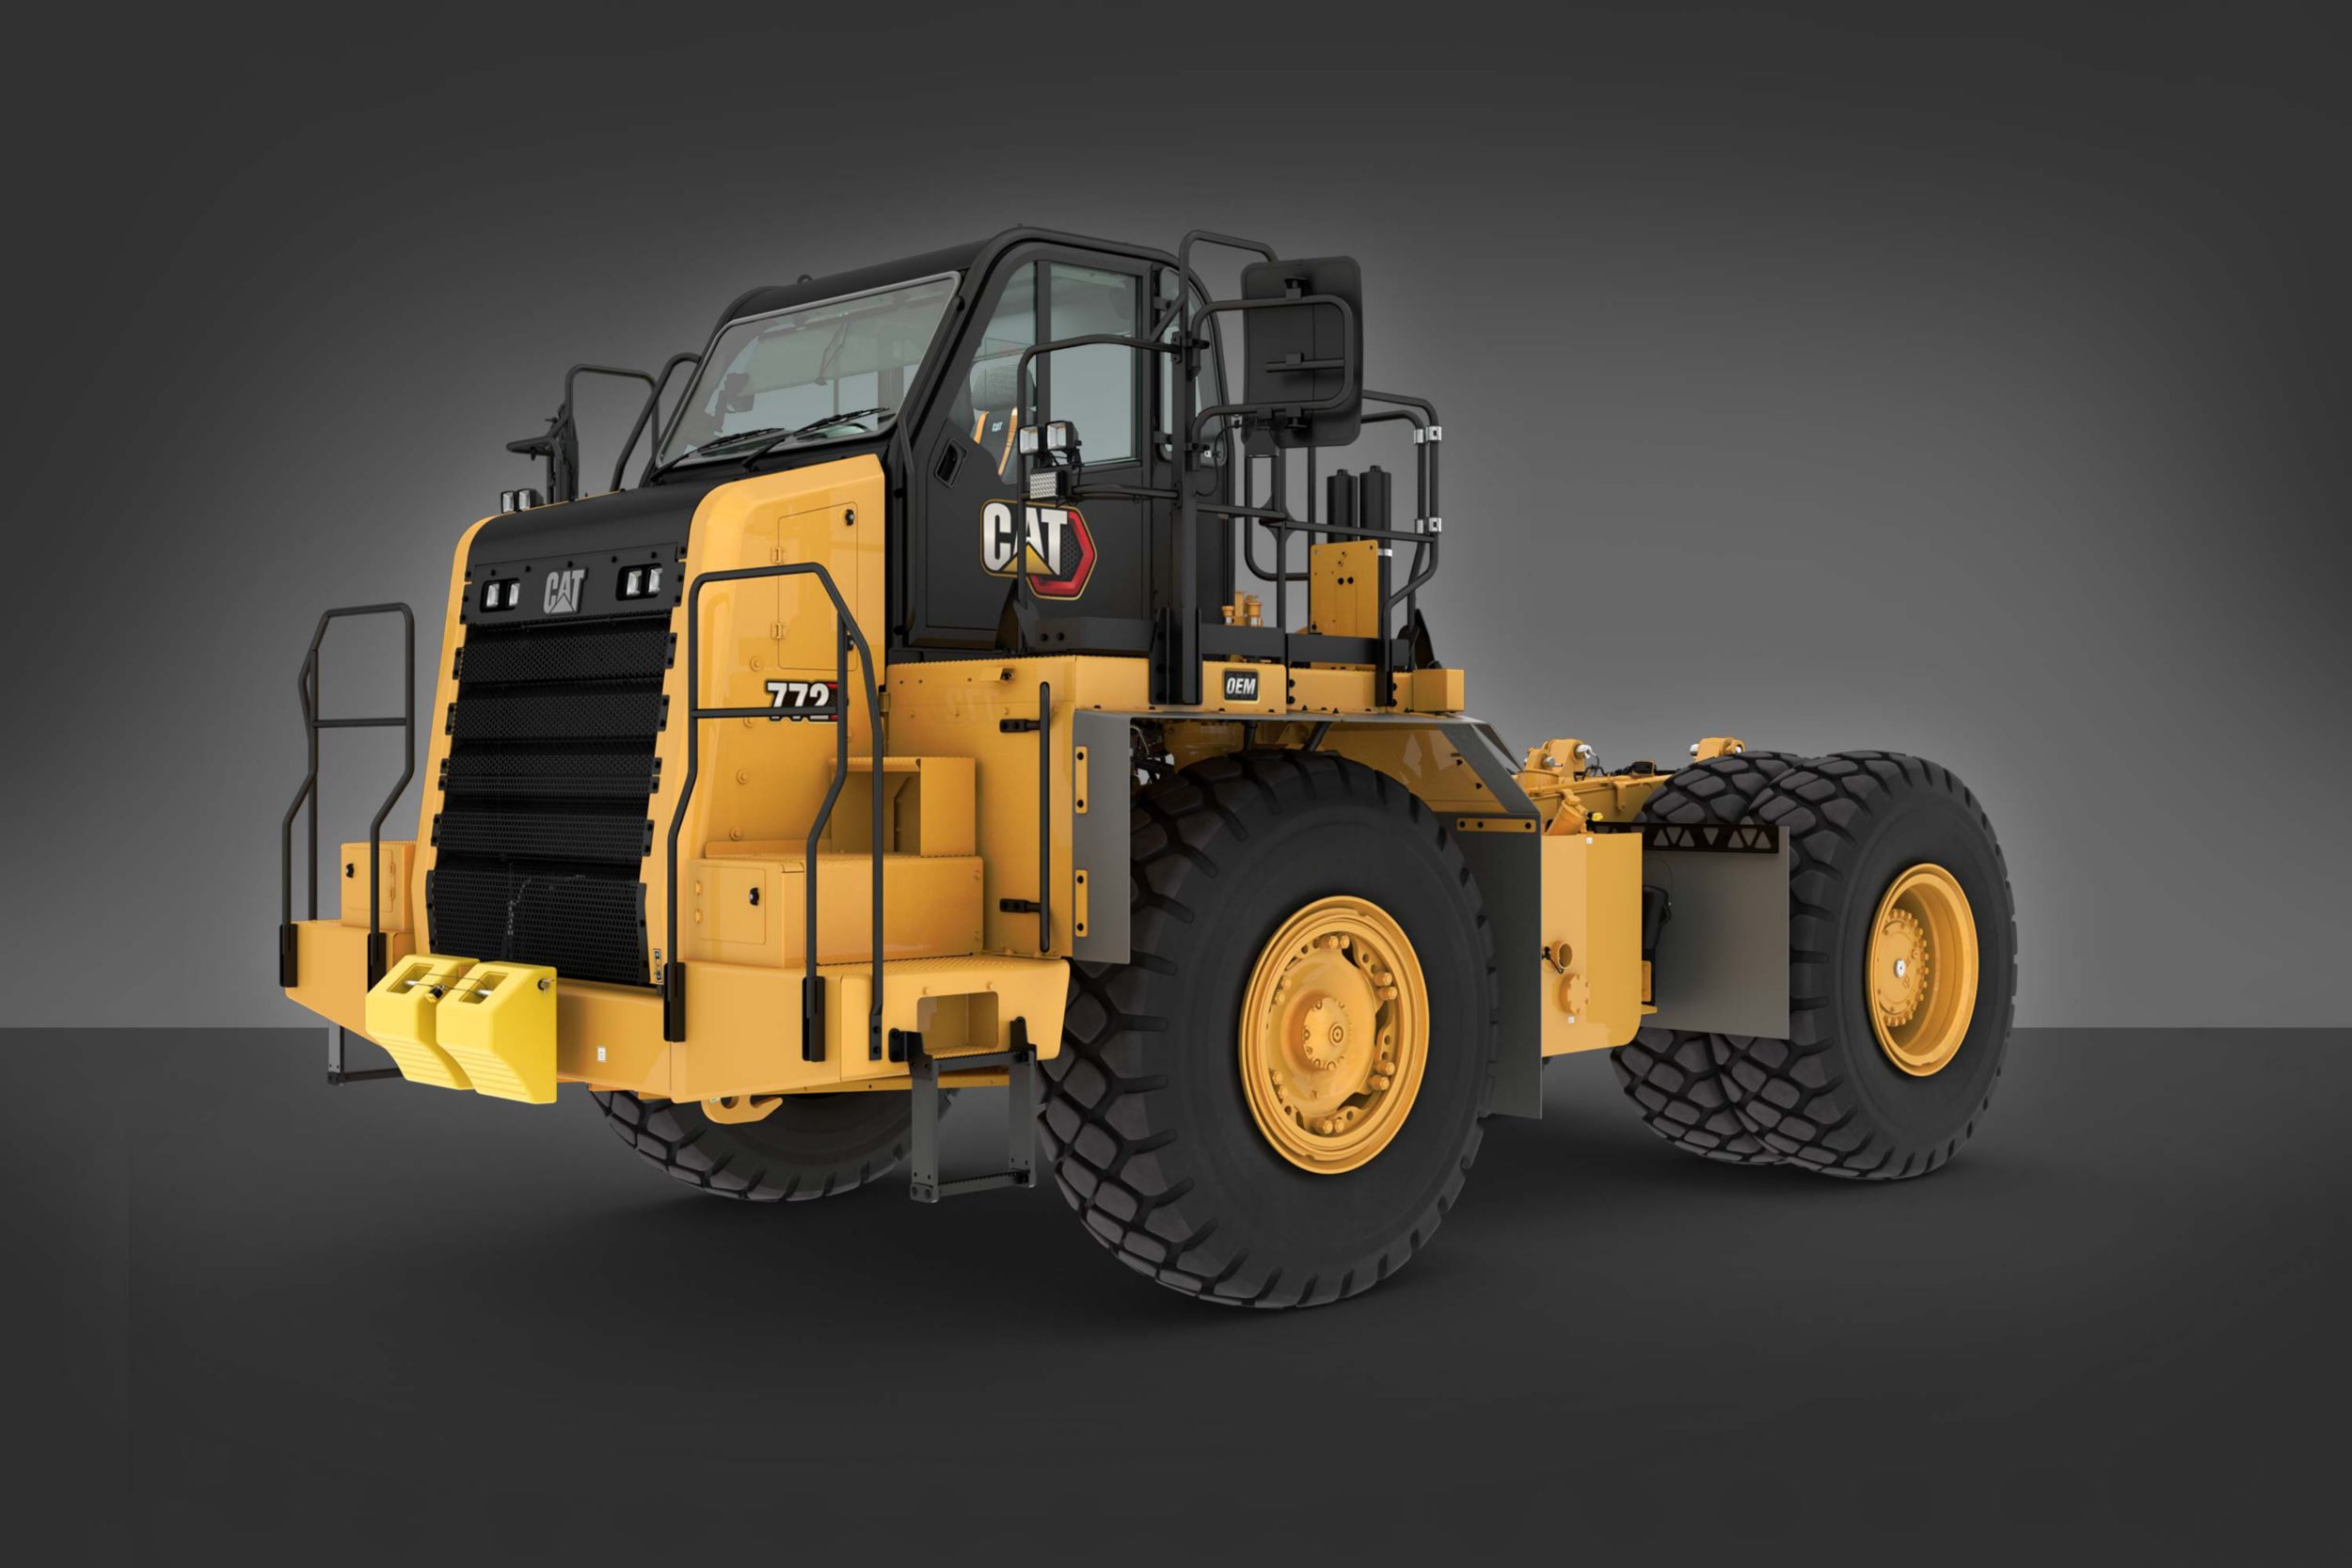 The Cat 772 bare chassis comes equipped with a higher Tractor ROPS certification ratings needed for specialty machines including water trucks, tow trucks, and fuel and lube trucks.